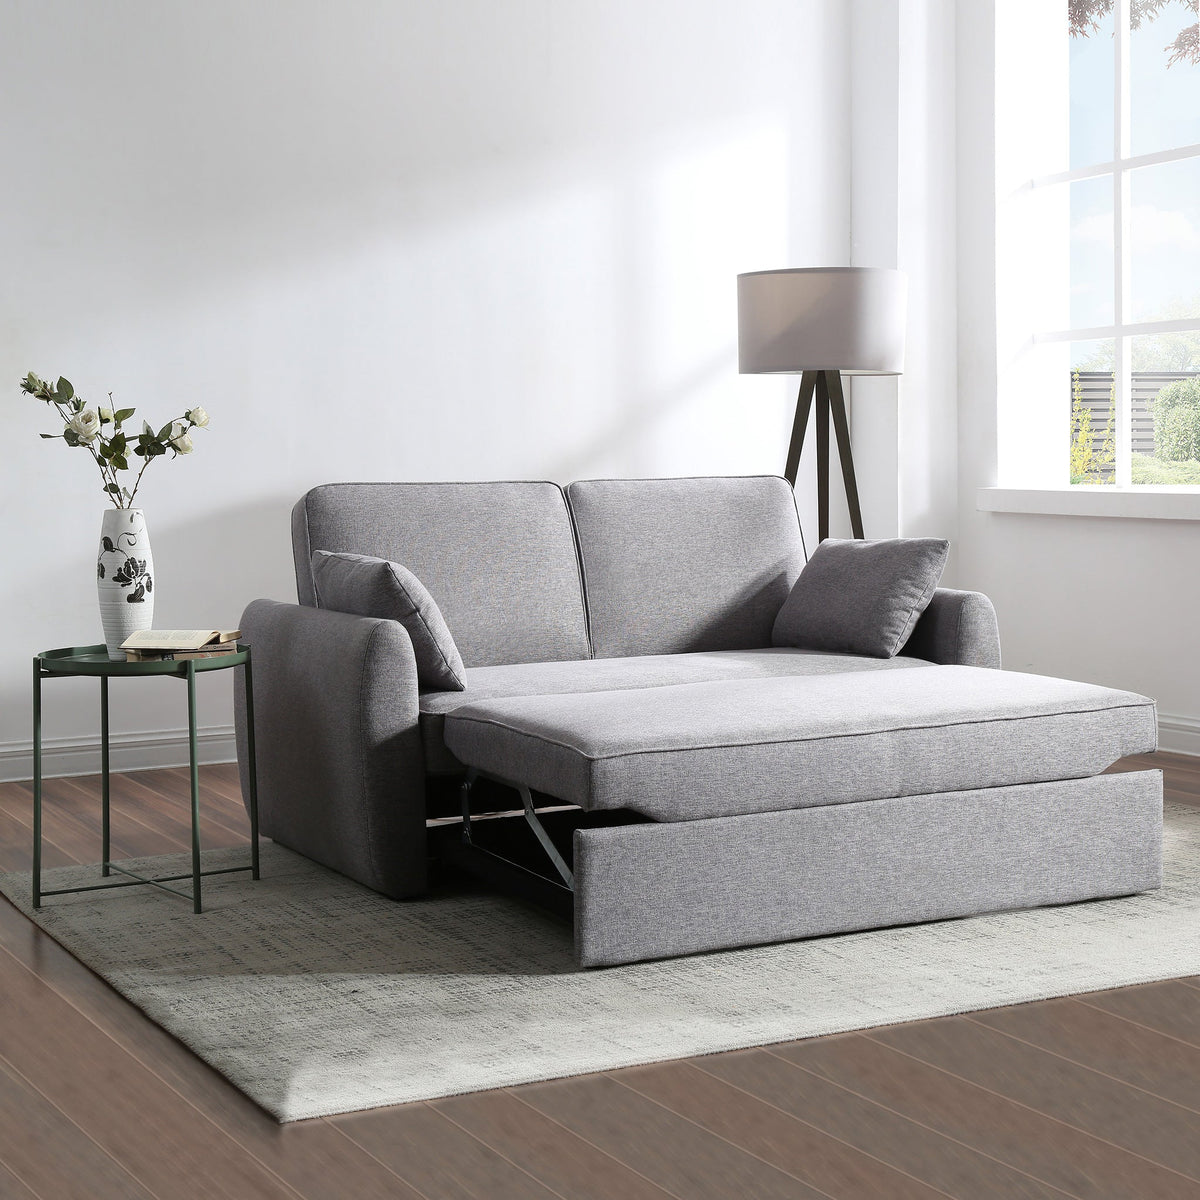 Naomi Grey 2 Seater Pop Up Sofa Bed For